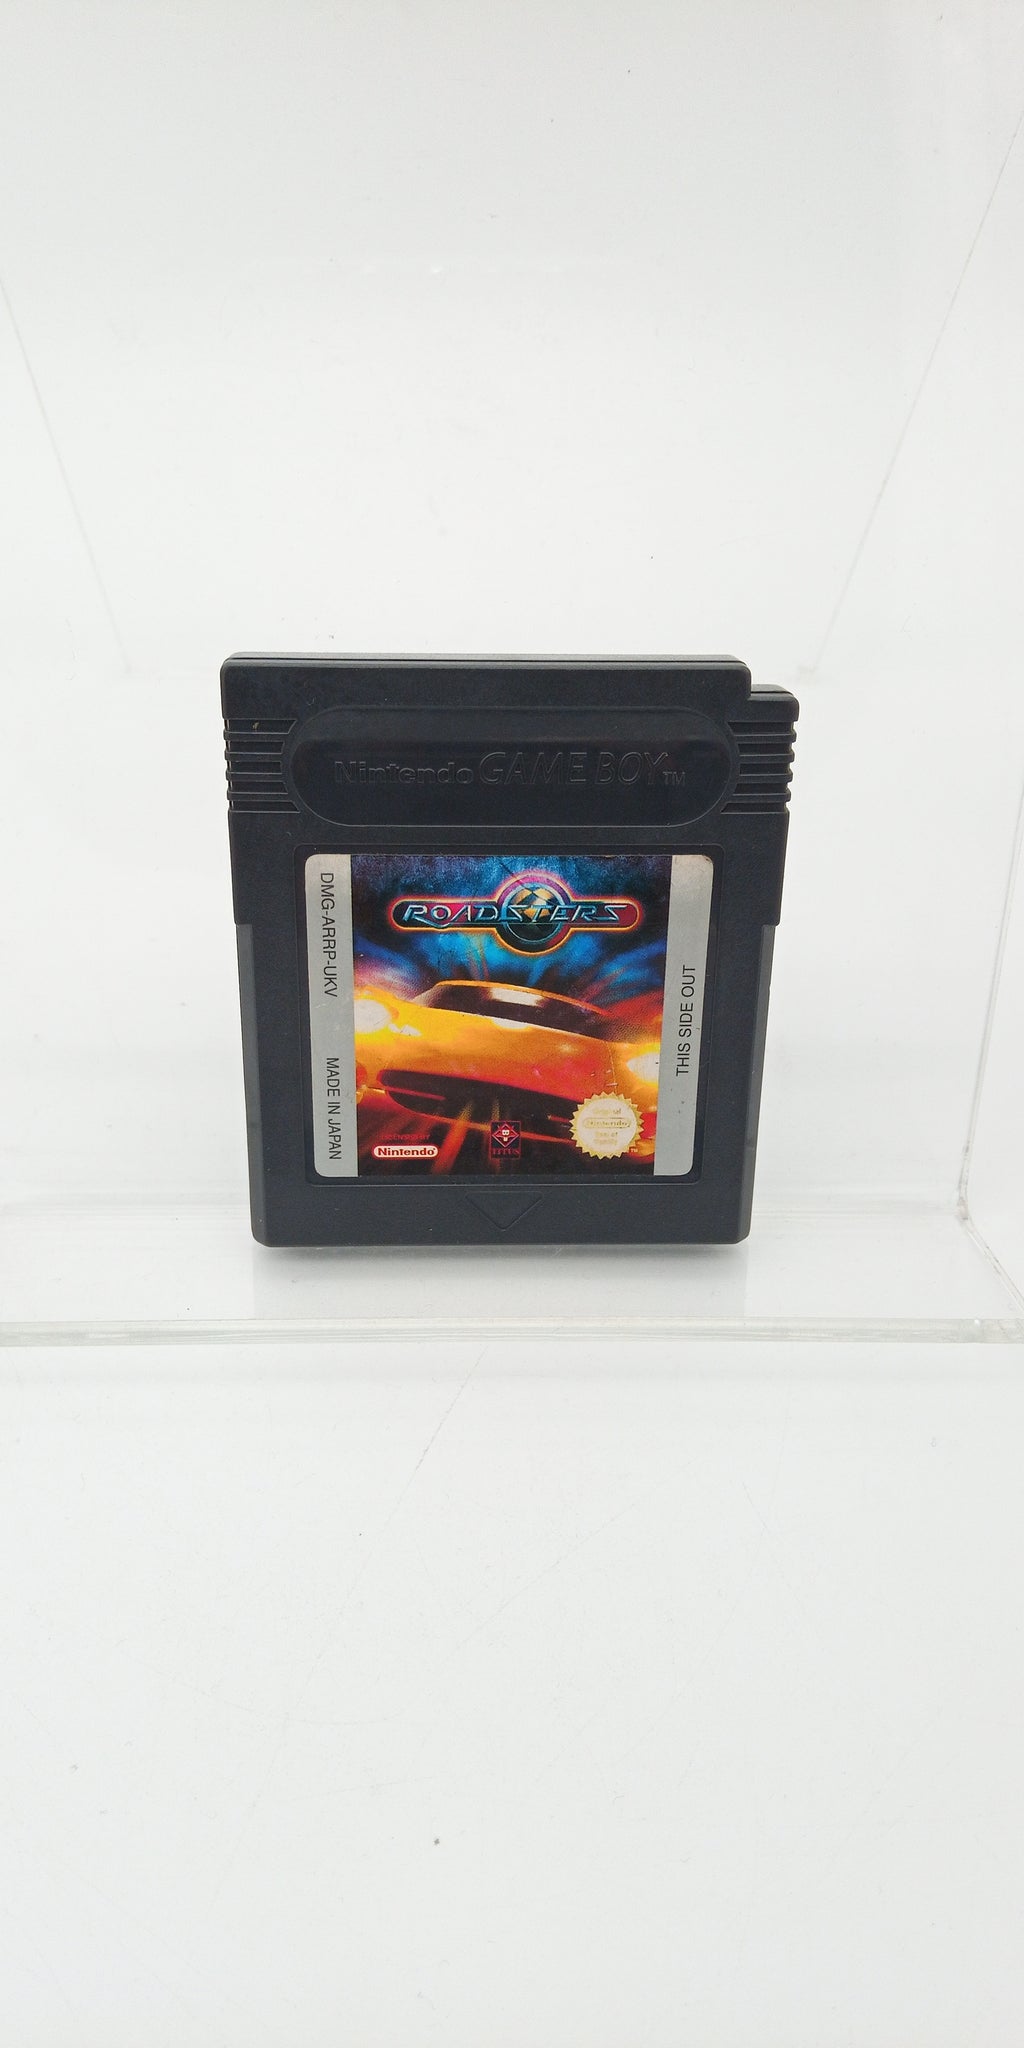 ROADSTERS TROPHY GAME BOY COLOR